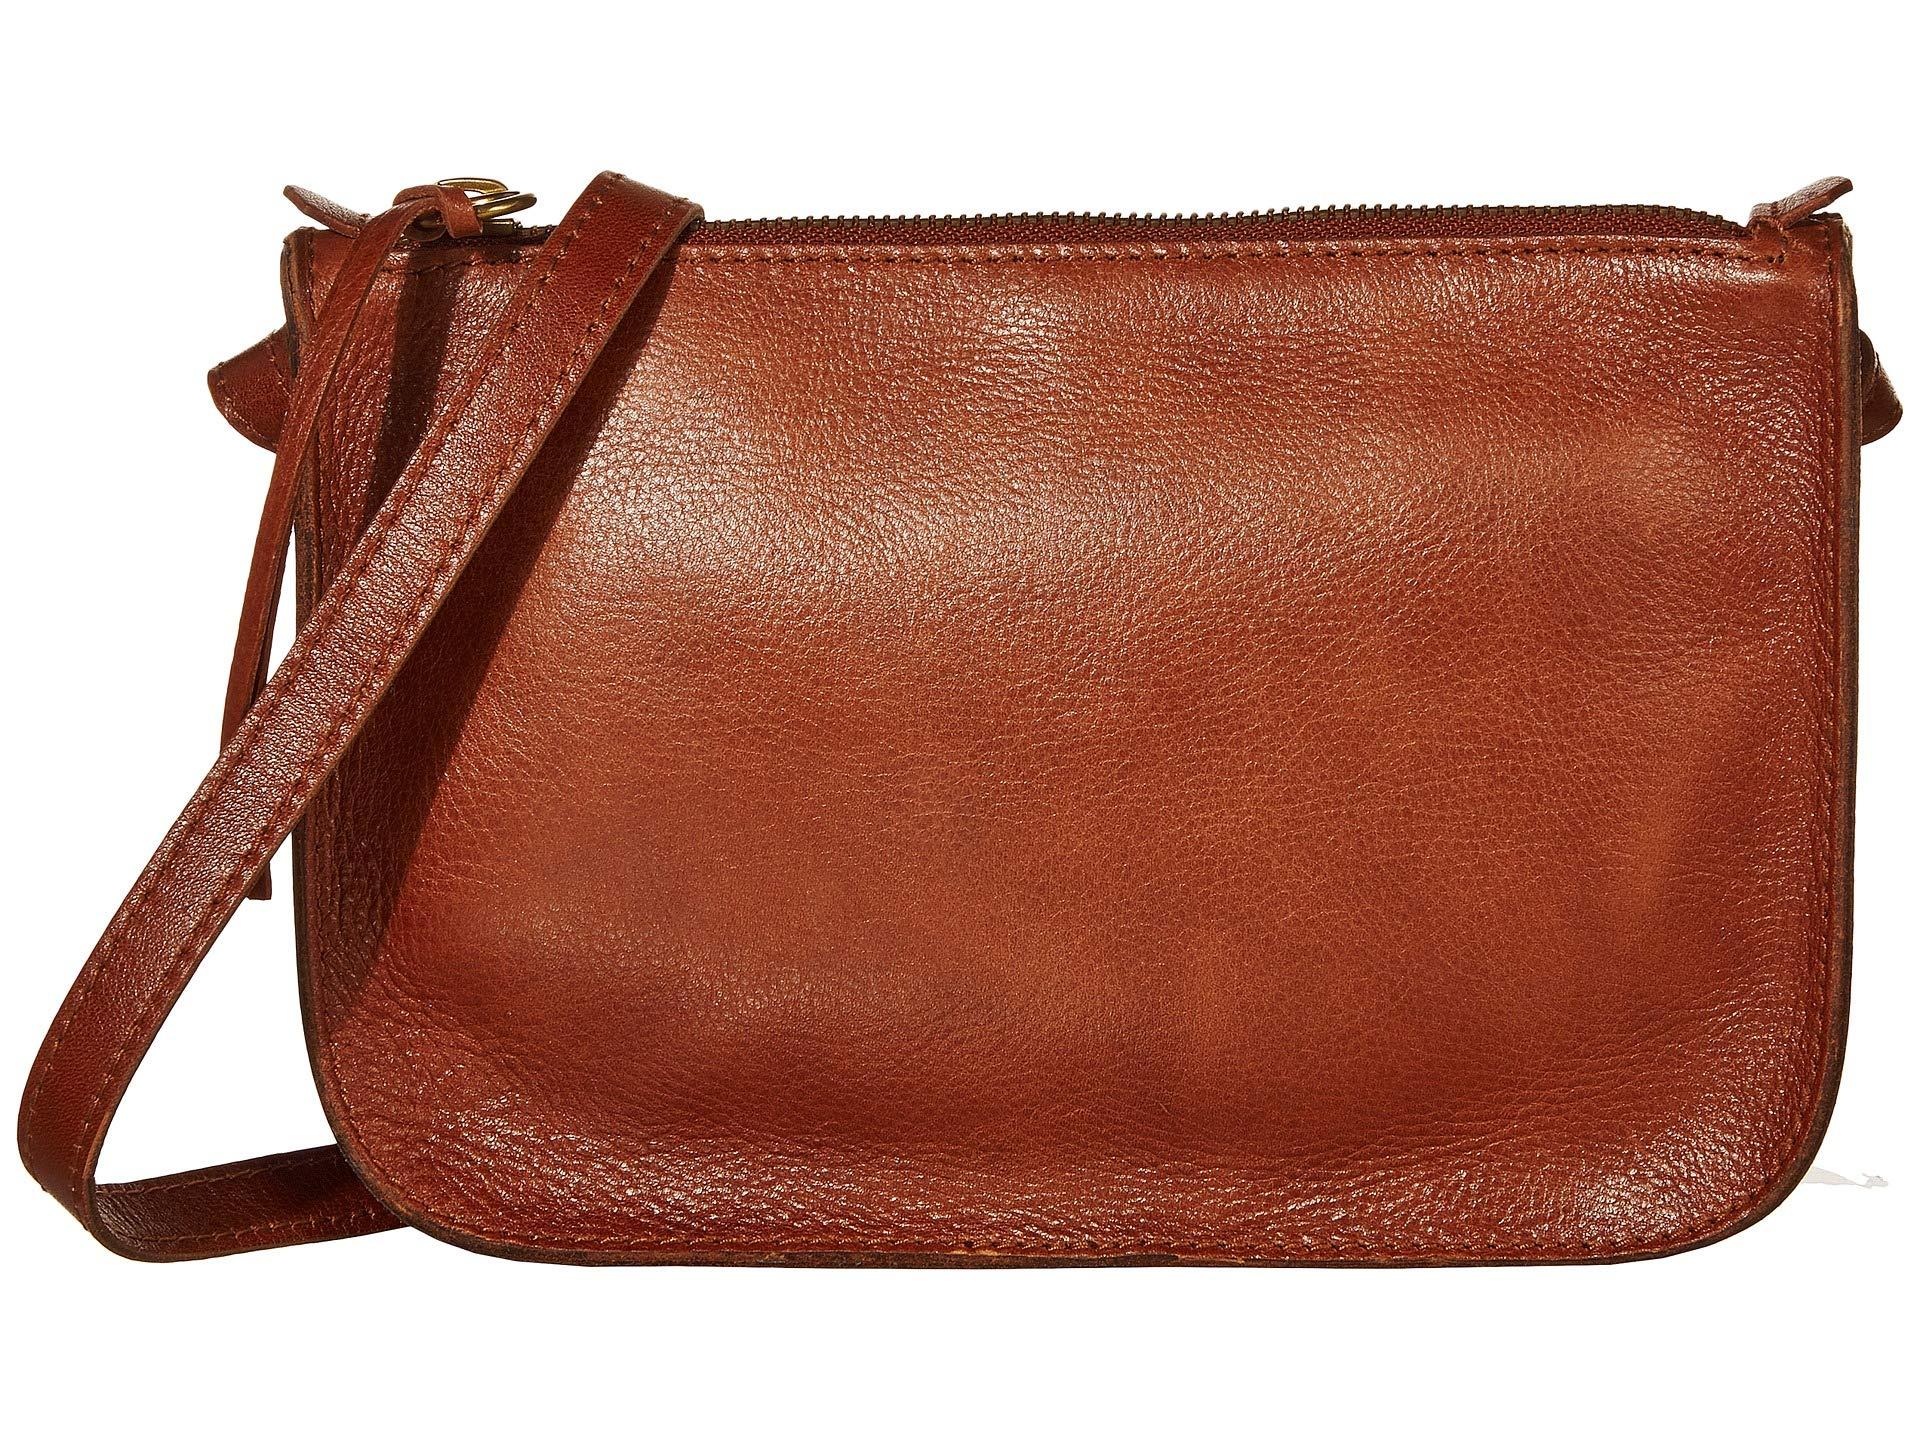 Madewell Leather The Simple Crossbody Bag in Brown - Lyst